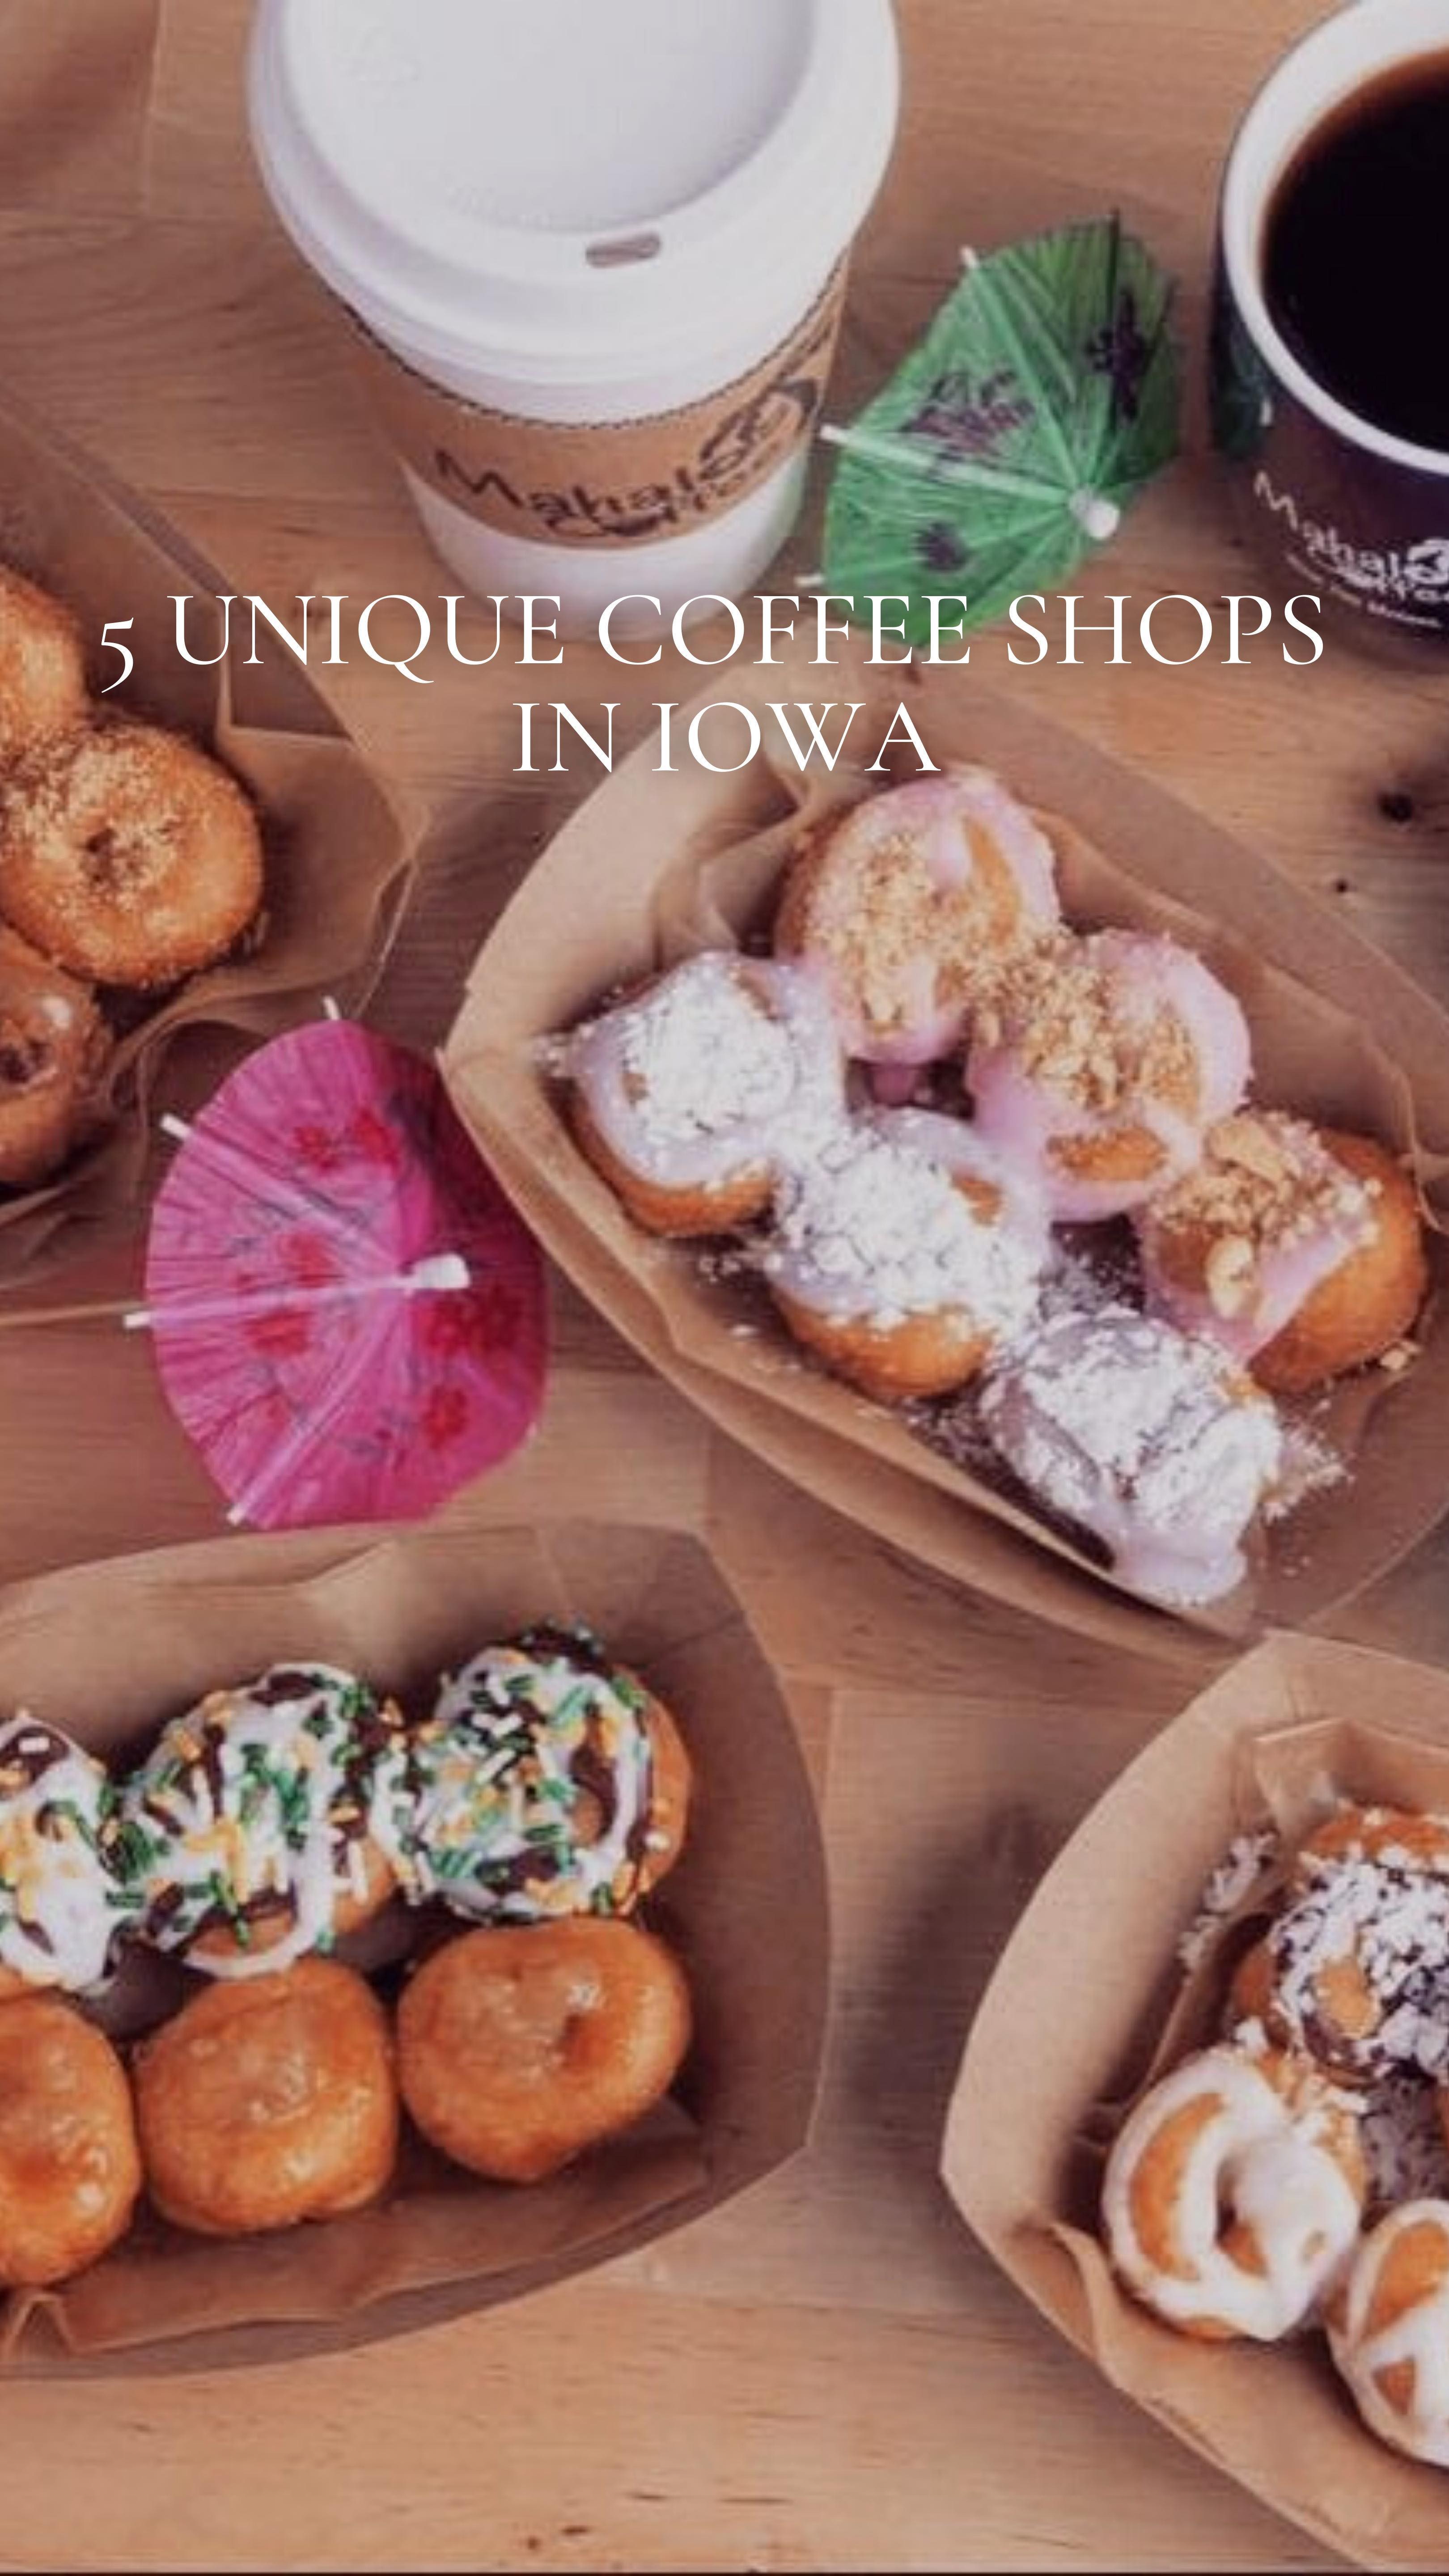 5 Unique Coffee Shops in Iowa ☕️ Soon-to-be snowy days are perfect for sitting inside a cozy cafe with plenty of sweet treats and warm beverages. Read about our top 5 picks using the link in our bio✨